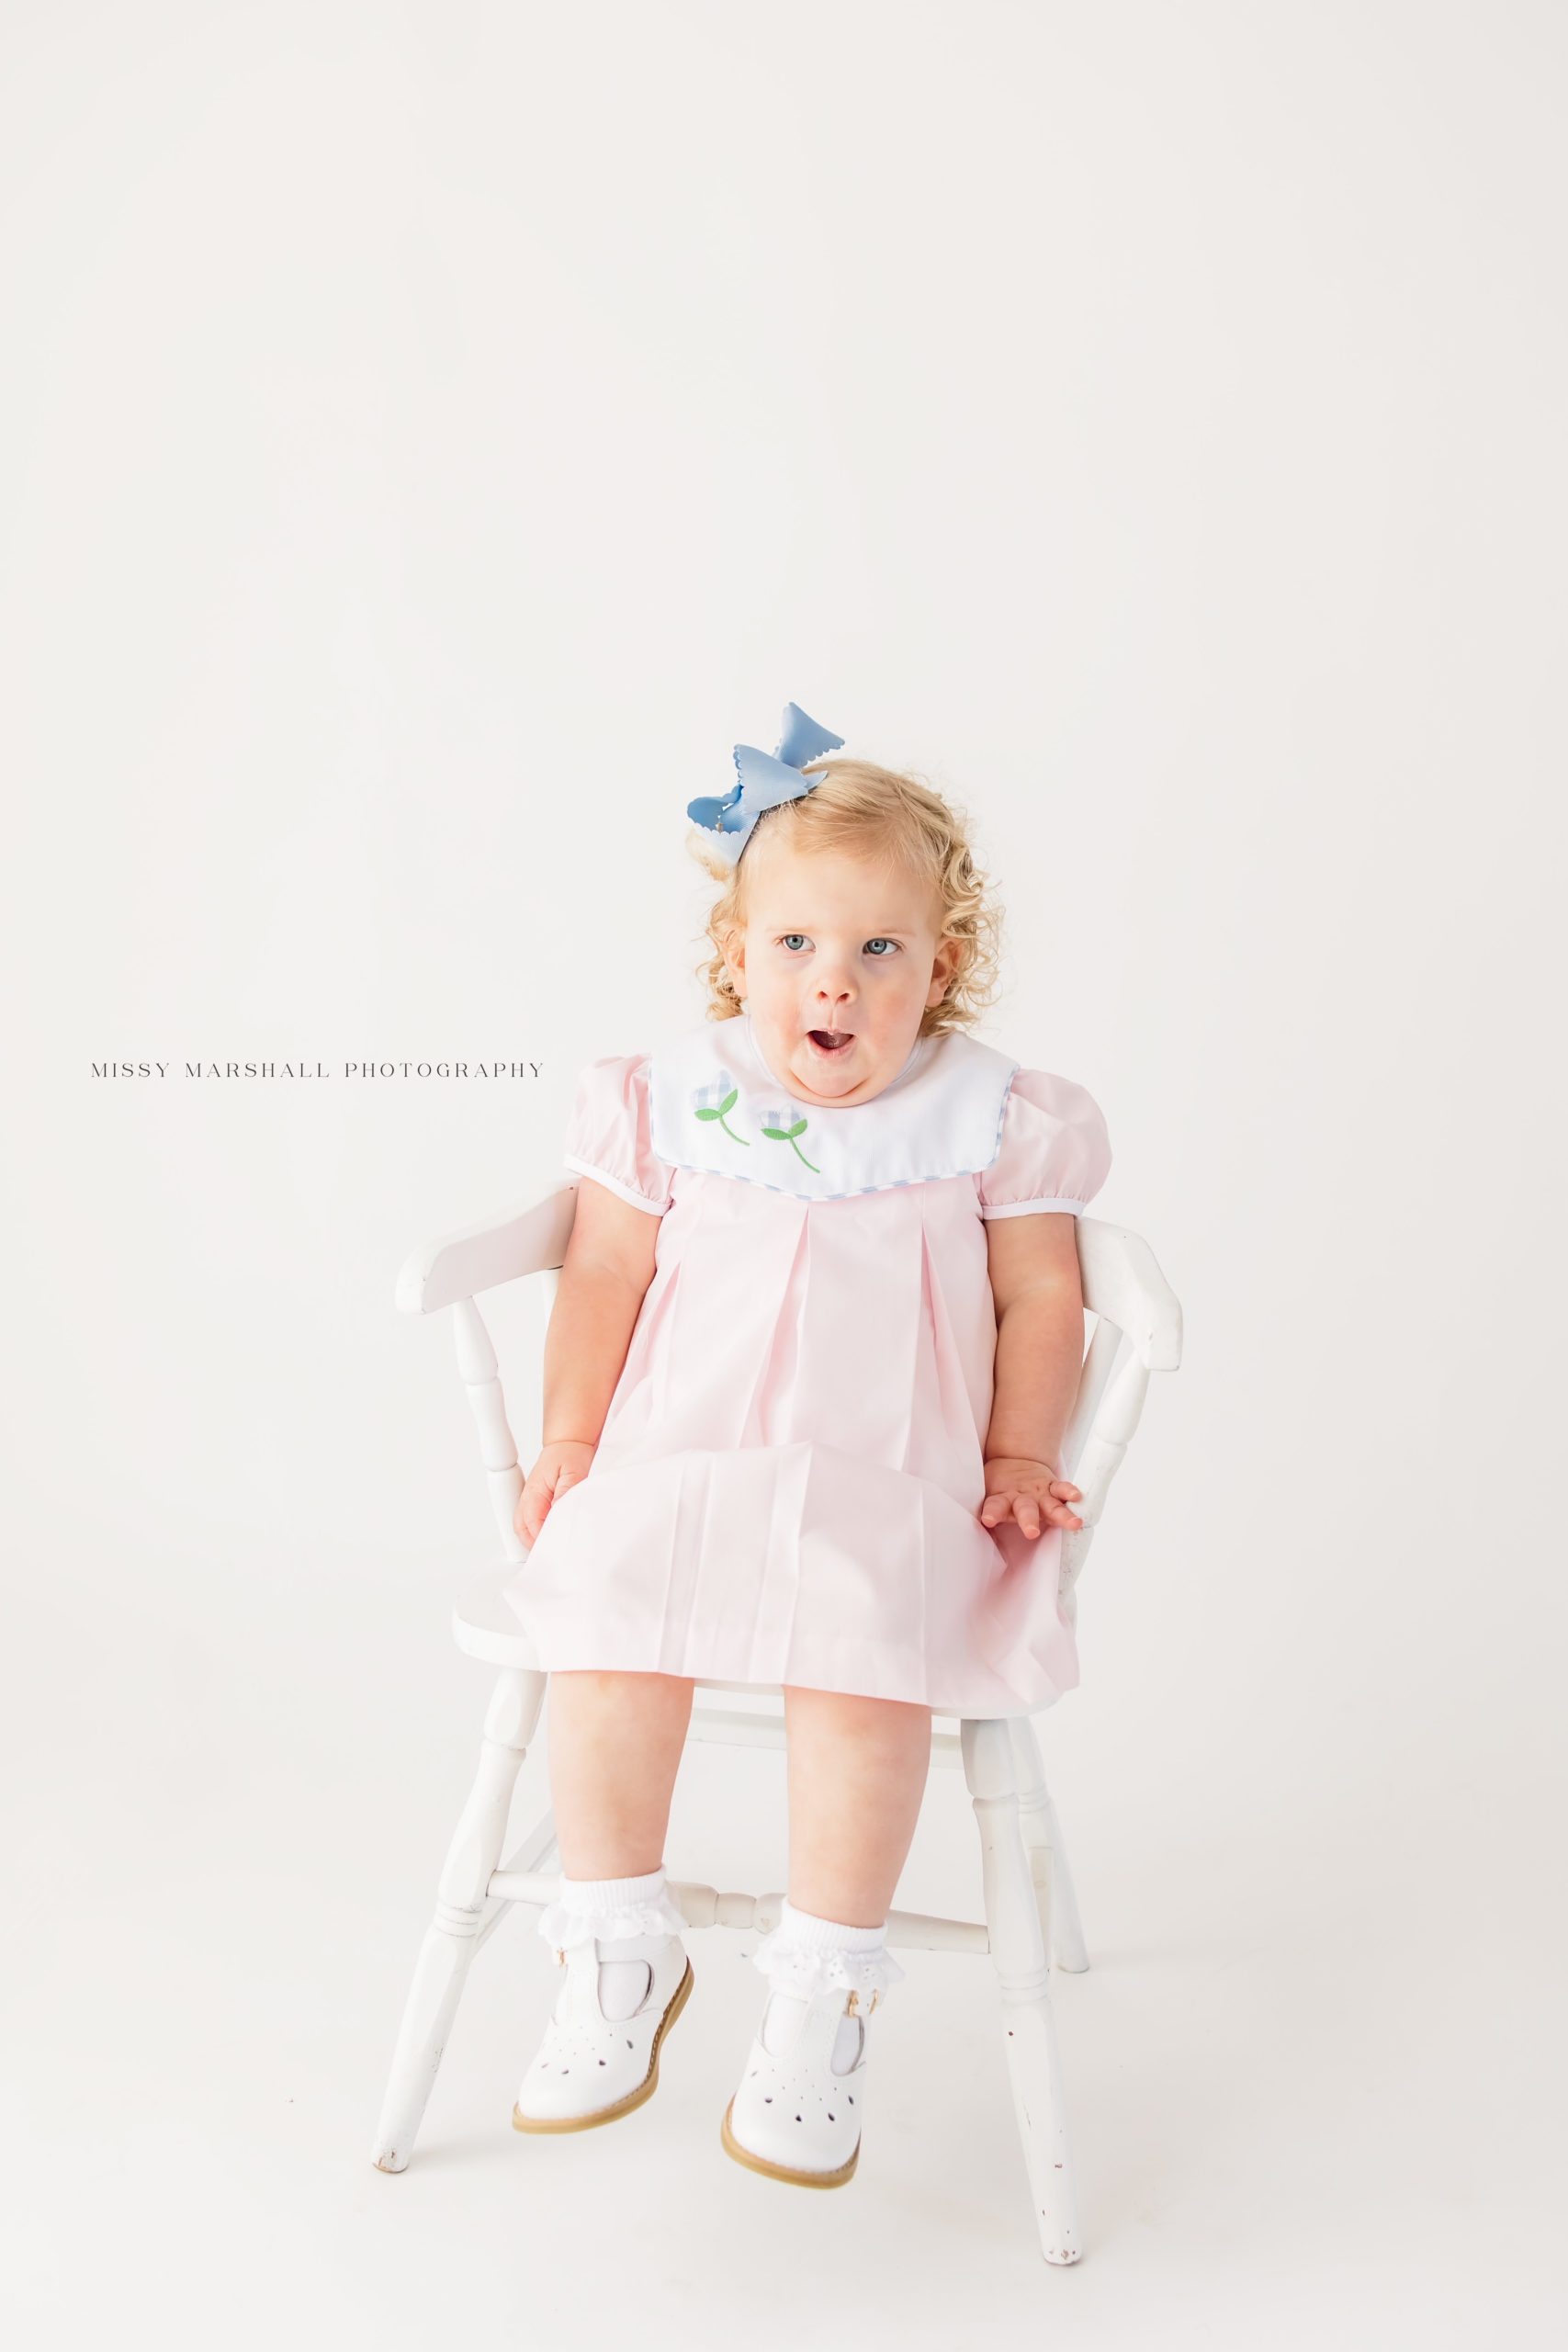 Baby girl making a funny face at a Louisville baby photographer with her hands in her lap during her milestone session